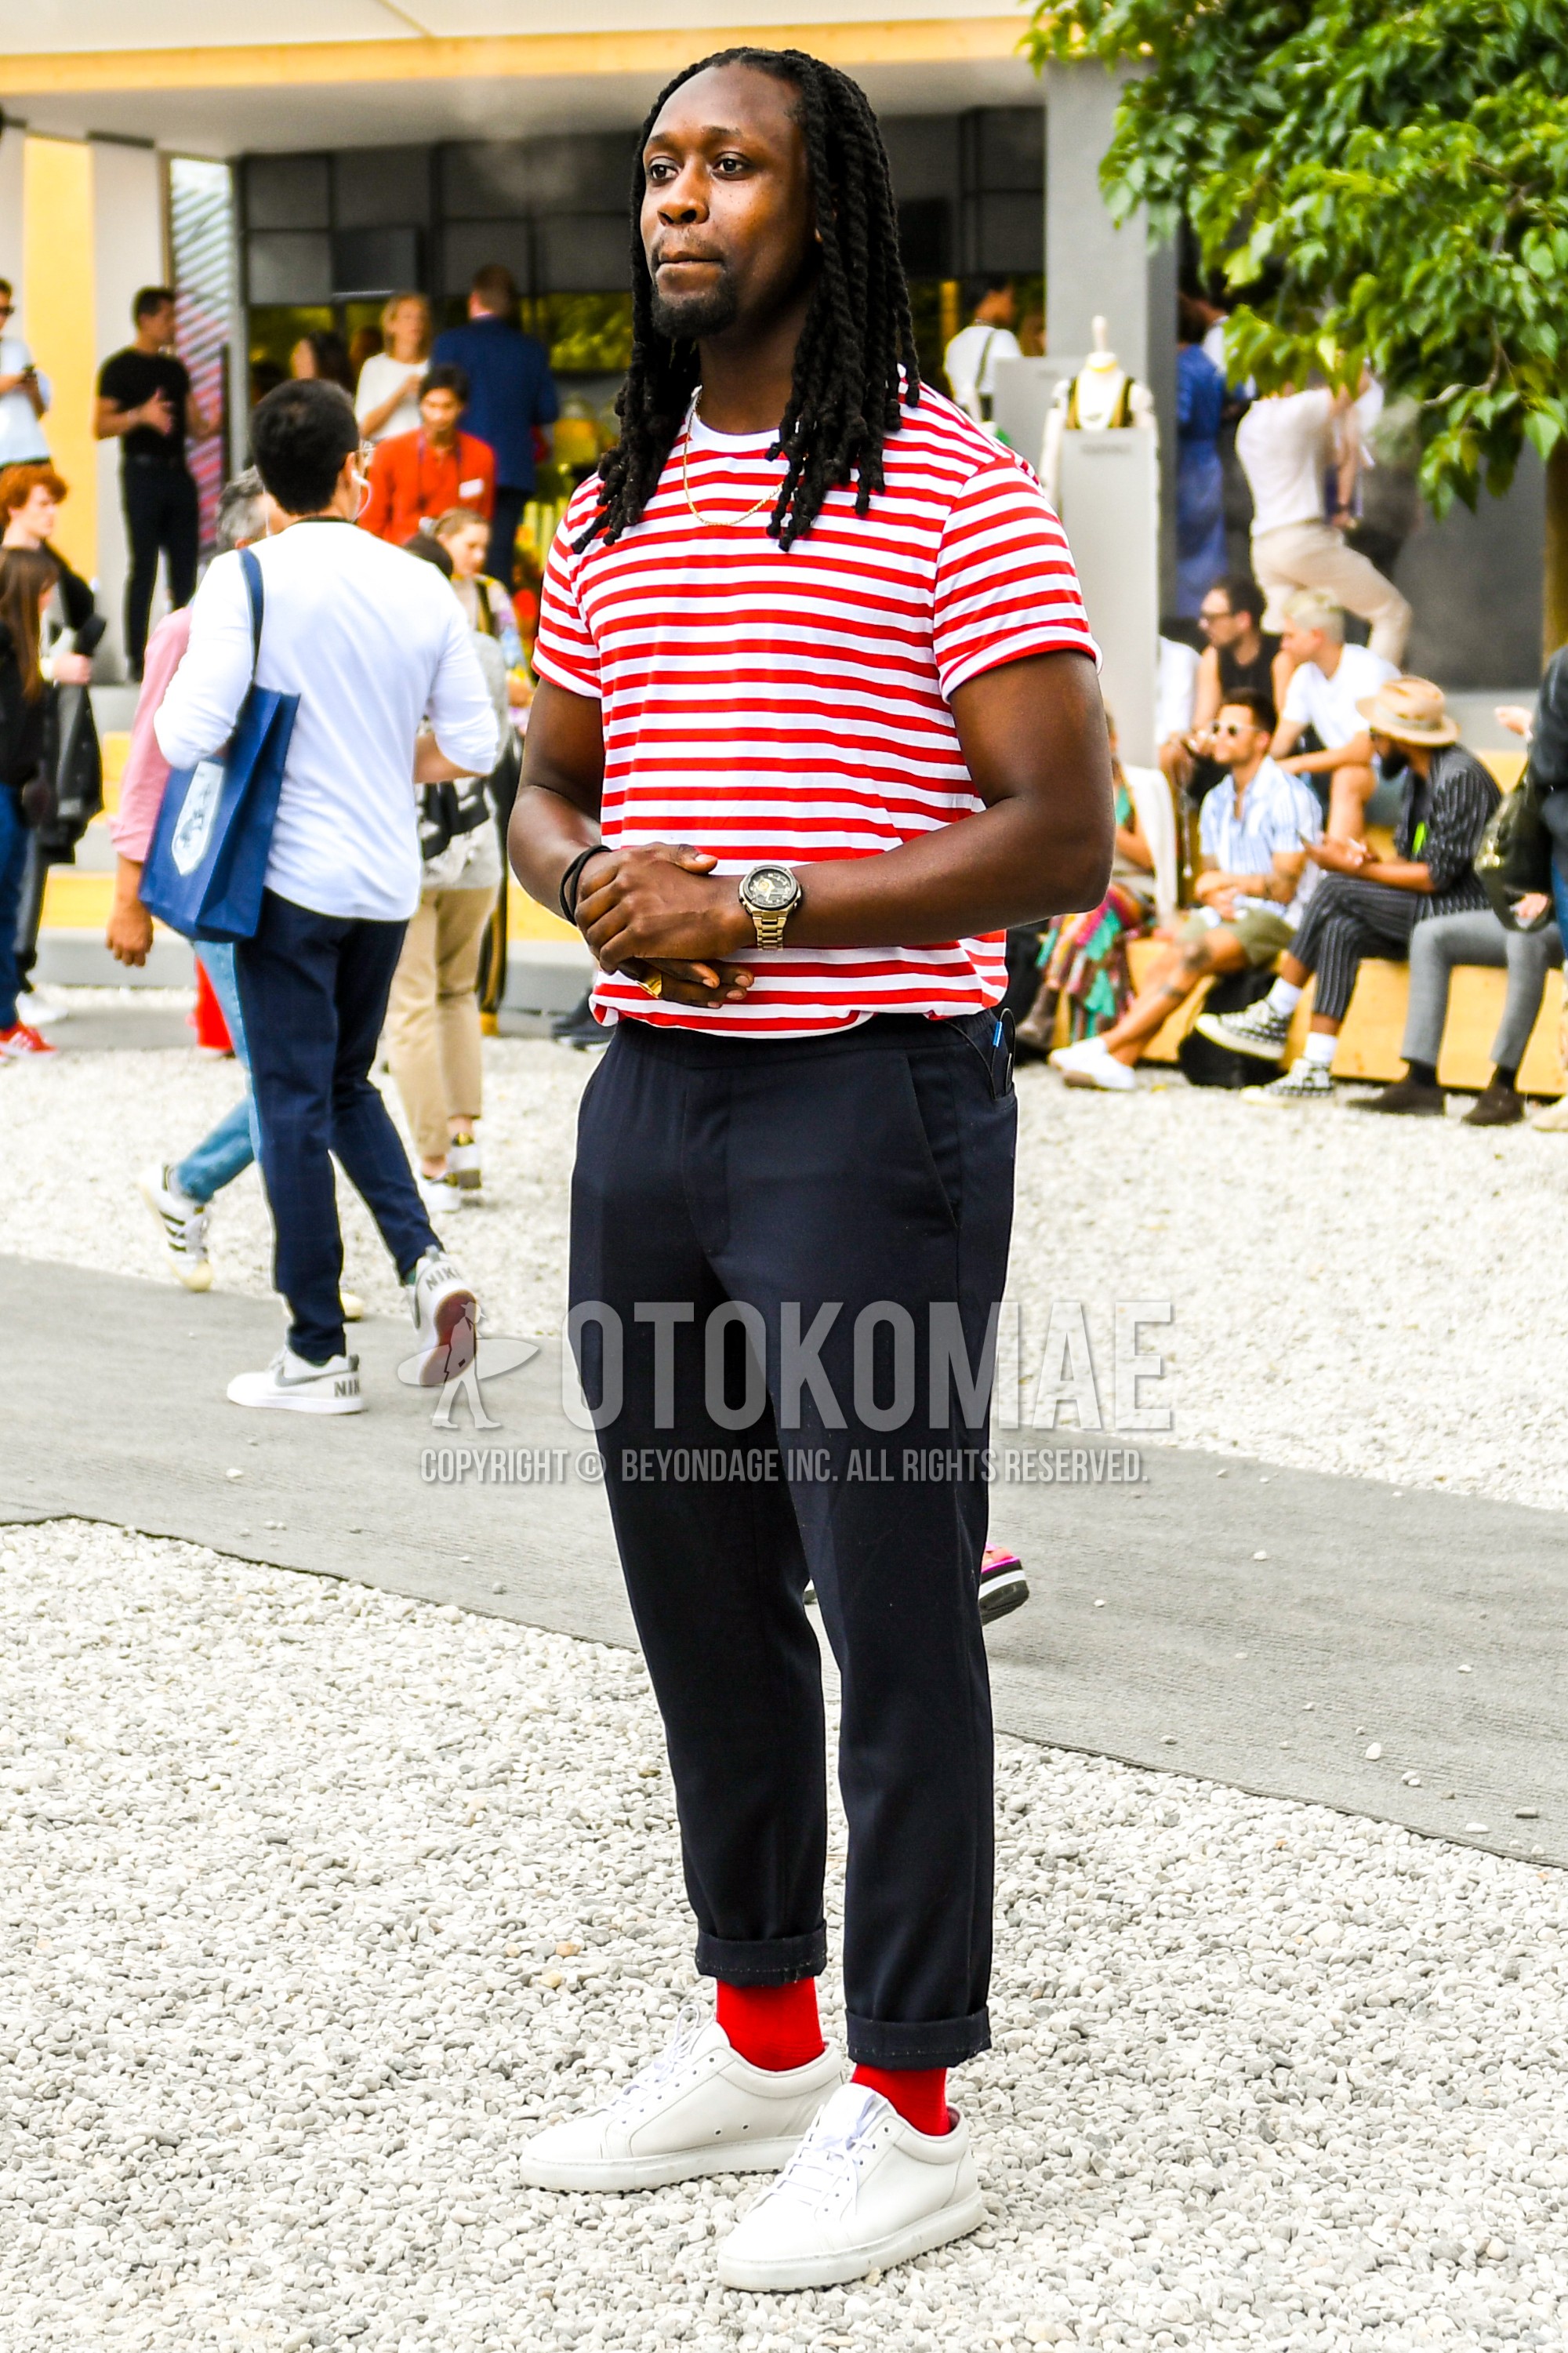 Men's summer outfit with white red horizontal stripes t-shirt, black plain cotton pants, red plain socks, white low-cut sneakers.